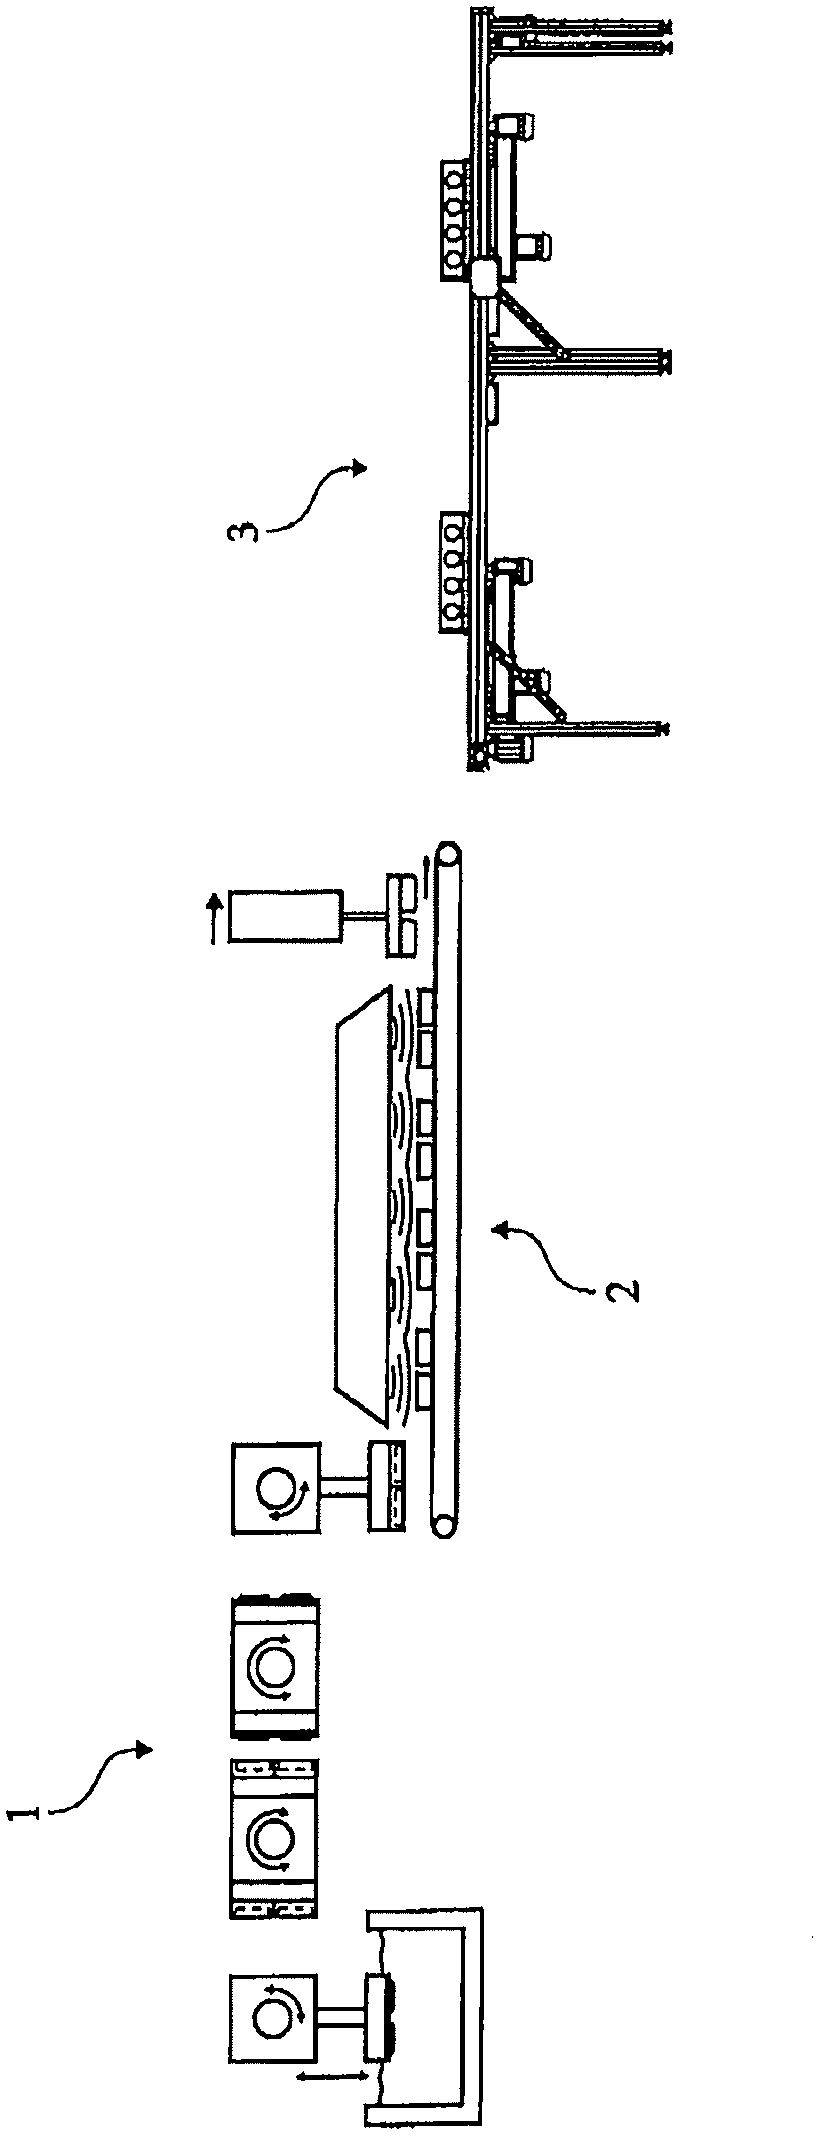 A method for applying a film on moulded fibrous product and a product produced by said method